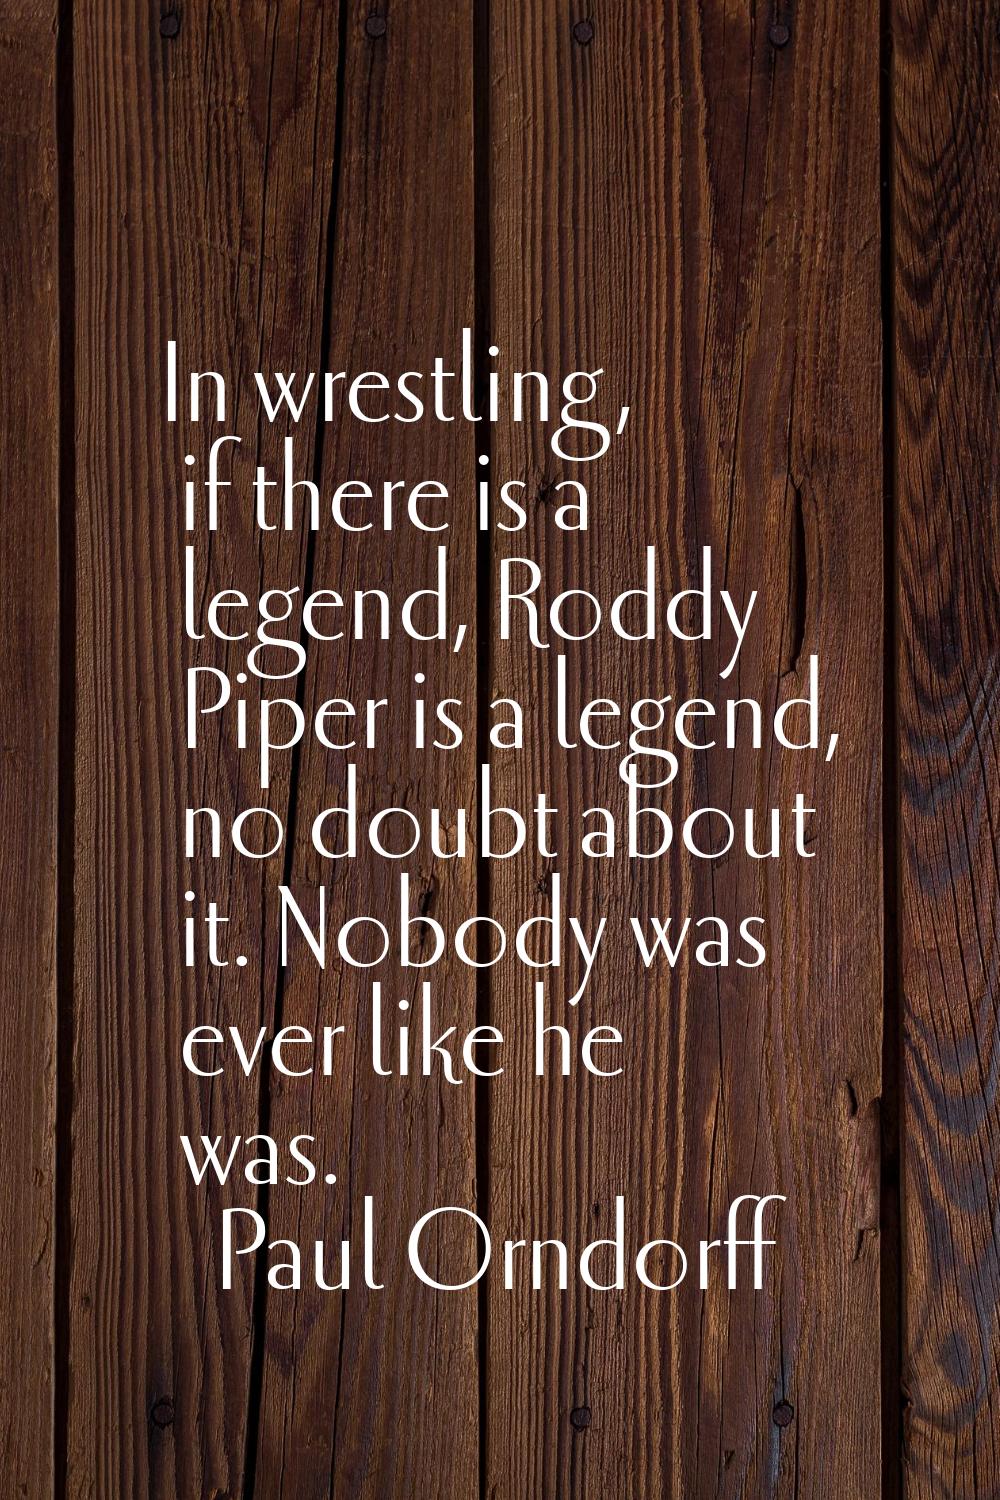 In wrestling, if there is a legend, Roddy Piper is a legend, no doubt about it. Nobody was ever lik